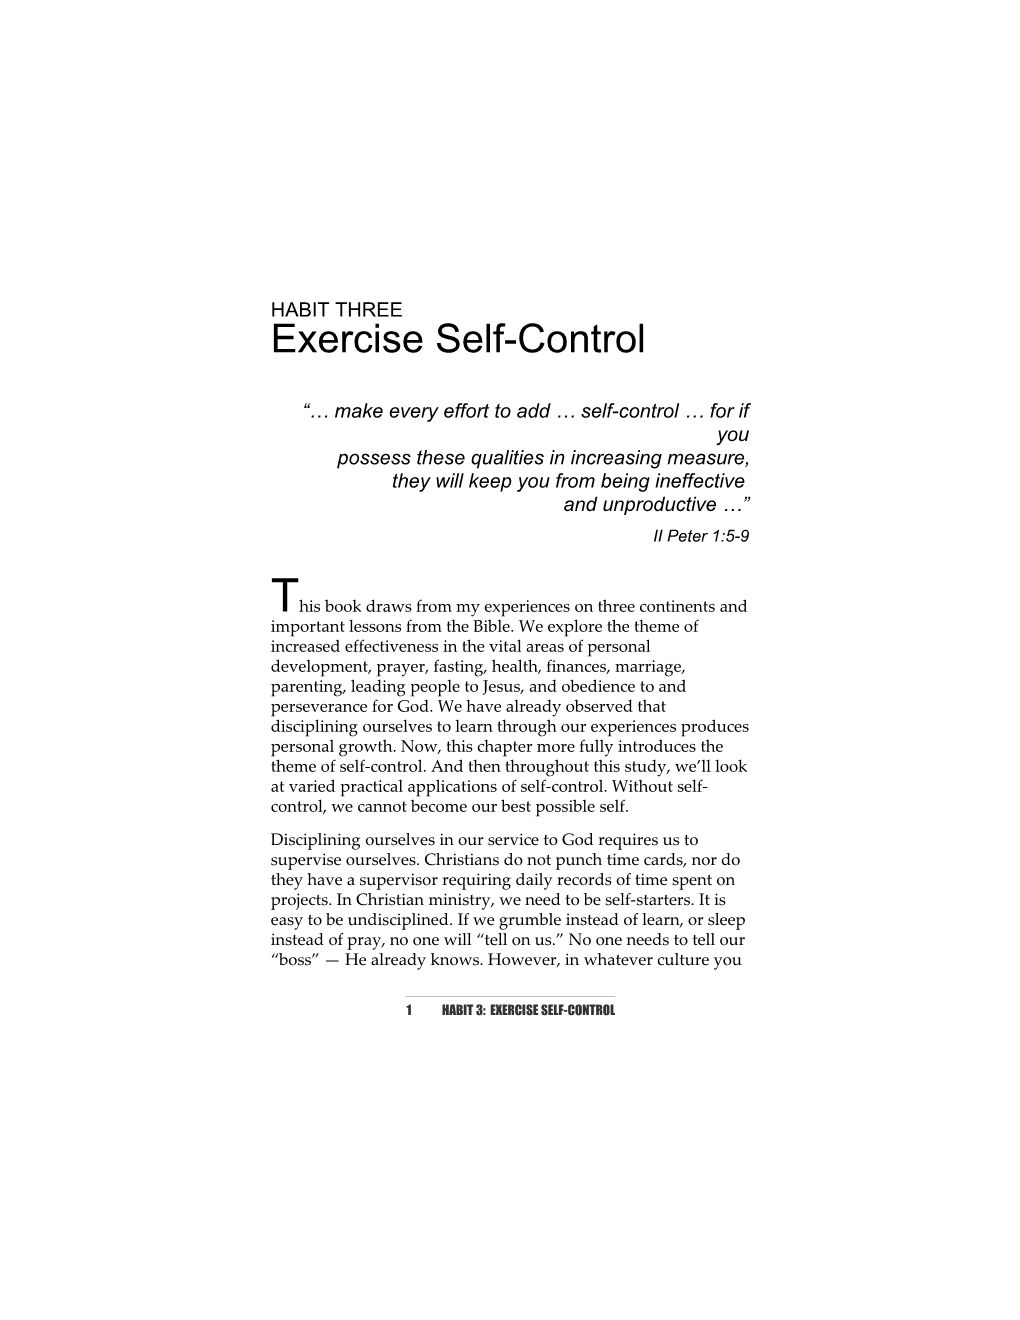 Exercise Self-Control